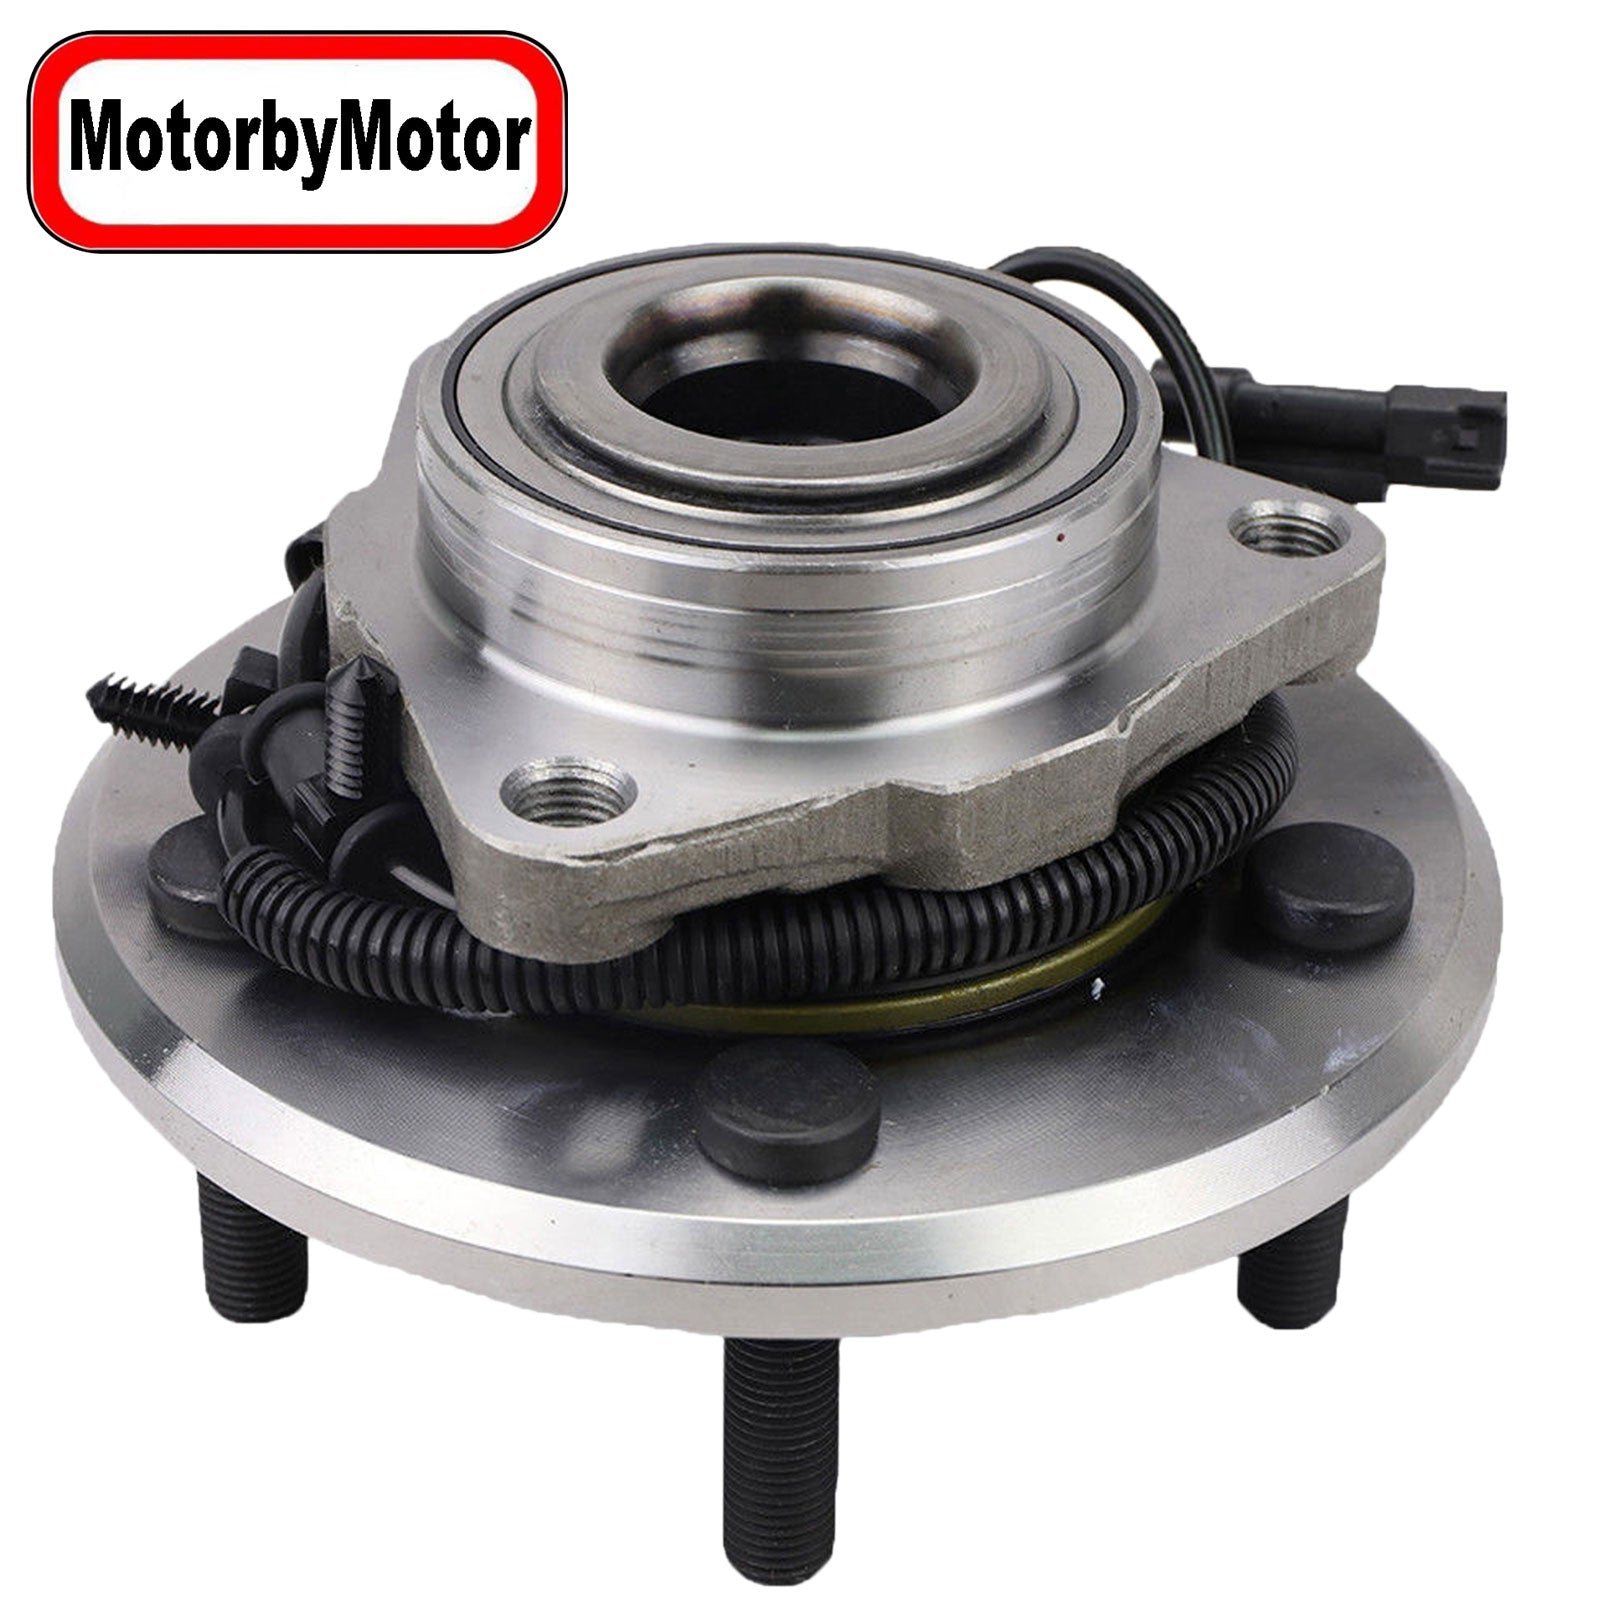 MotorbyMotor 515151 Front Wheel Bearing and Hub Assembly w/5 Lugs Fits for 2012-2018 Dodge Ram 1500, 2019 Dodge Ram 1500 Classic Low-Runout OE Directly Replacement Hub Bearing w/ABS MotorbyMotor